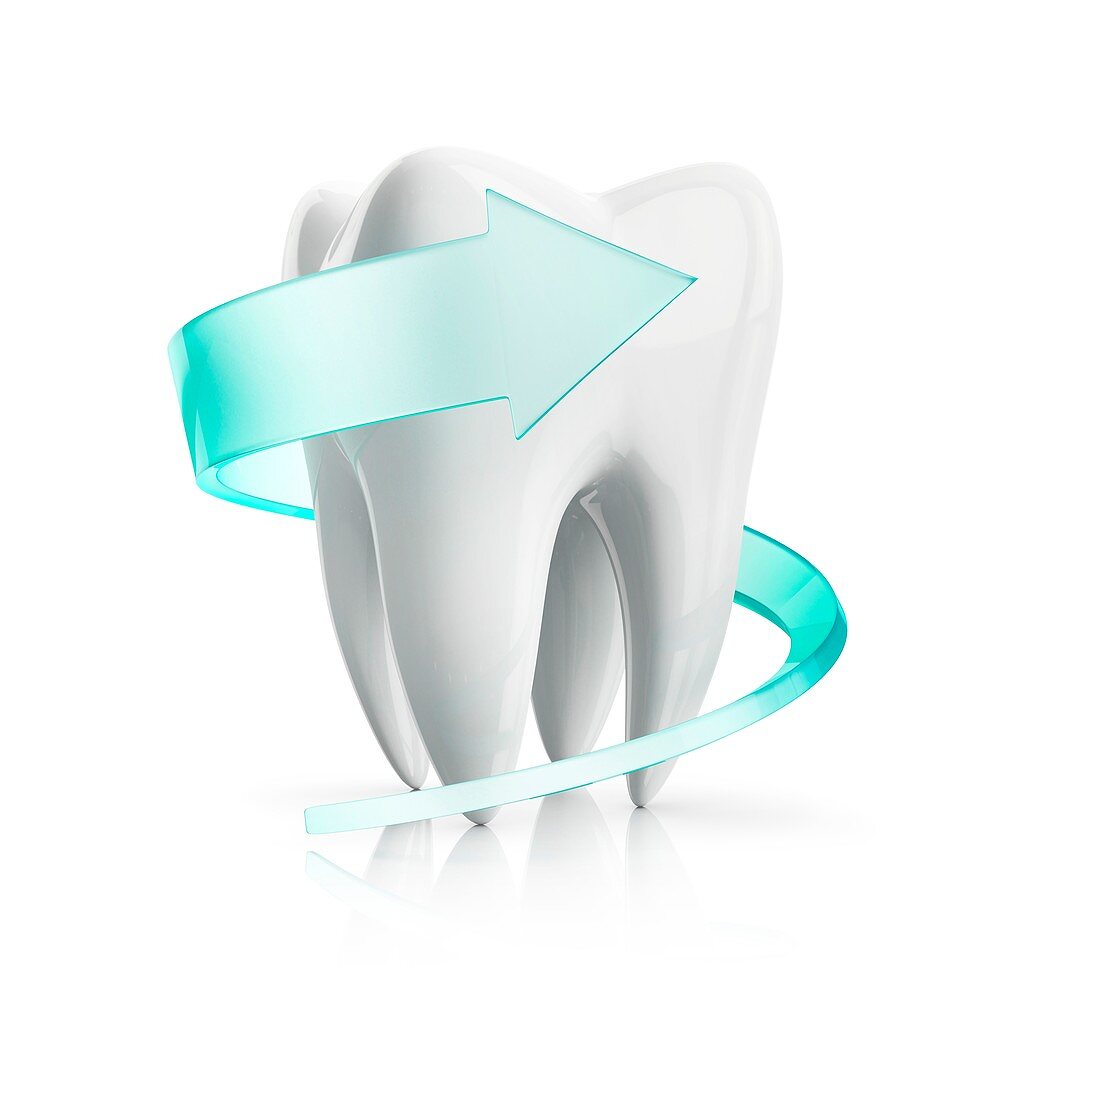 Tooth protection, conceptual illustration